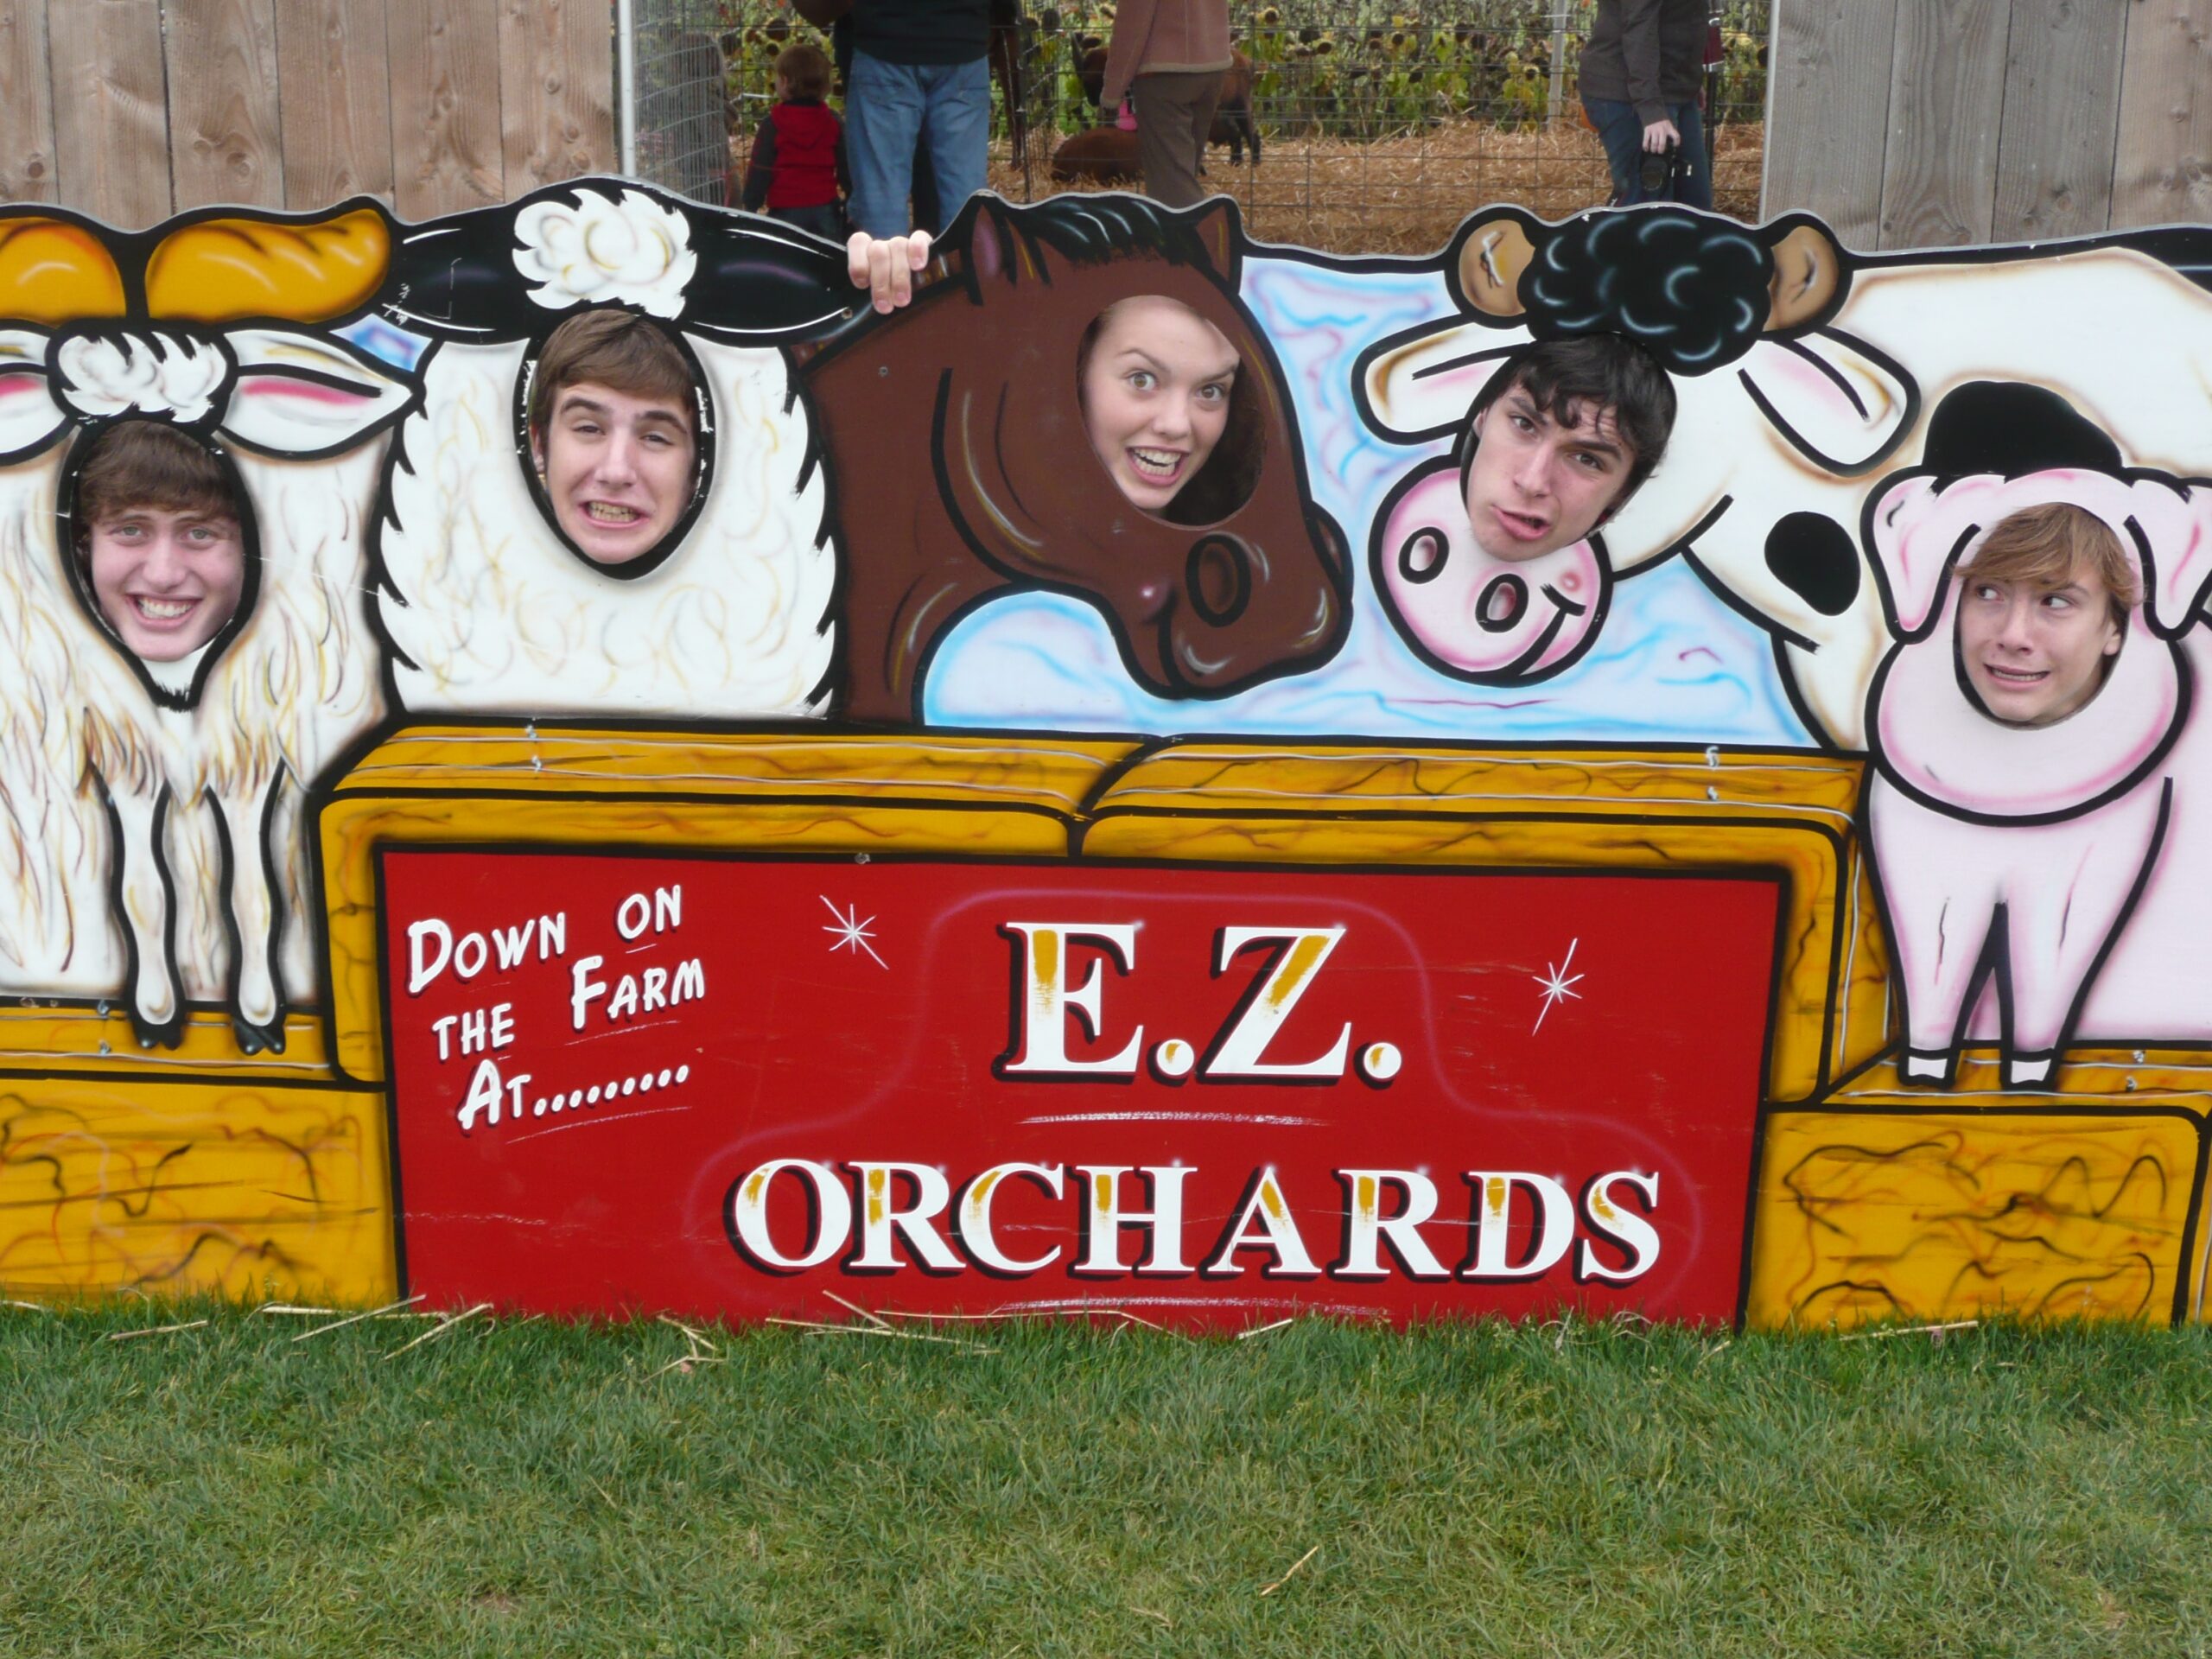 Jew Crew putting their faces through animal cut outs at E.Z. Orchards